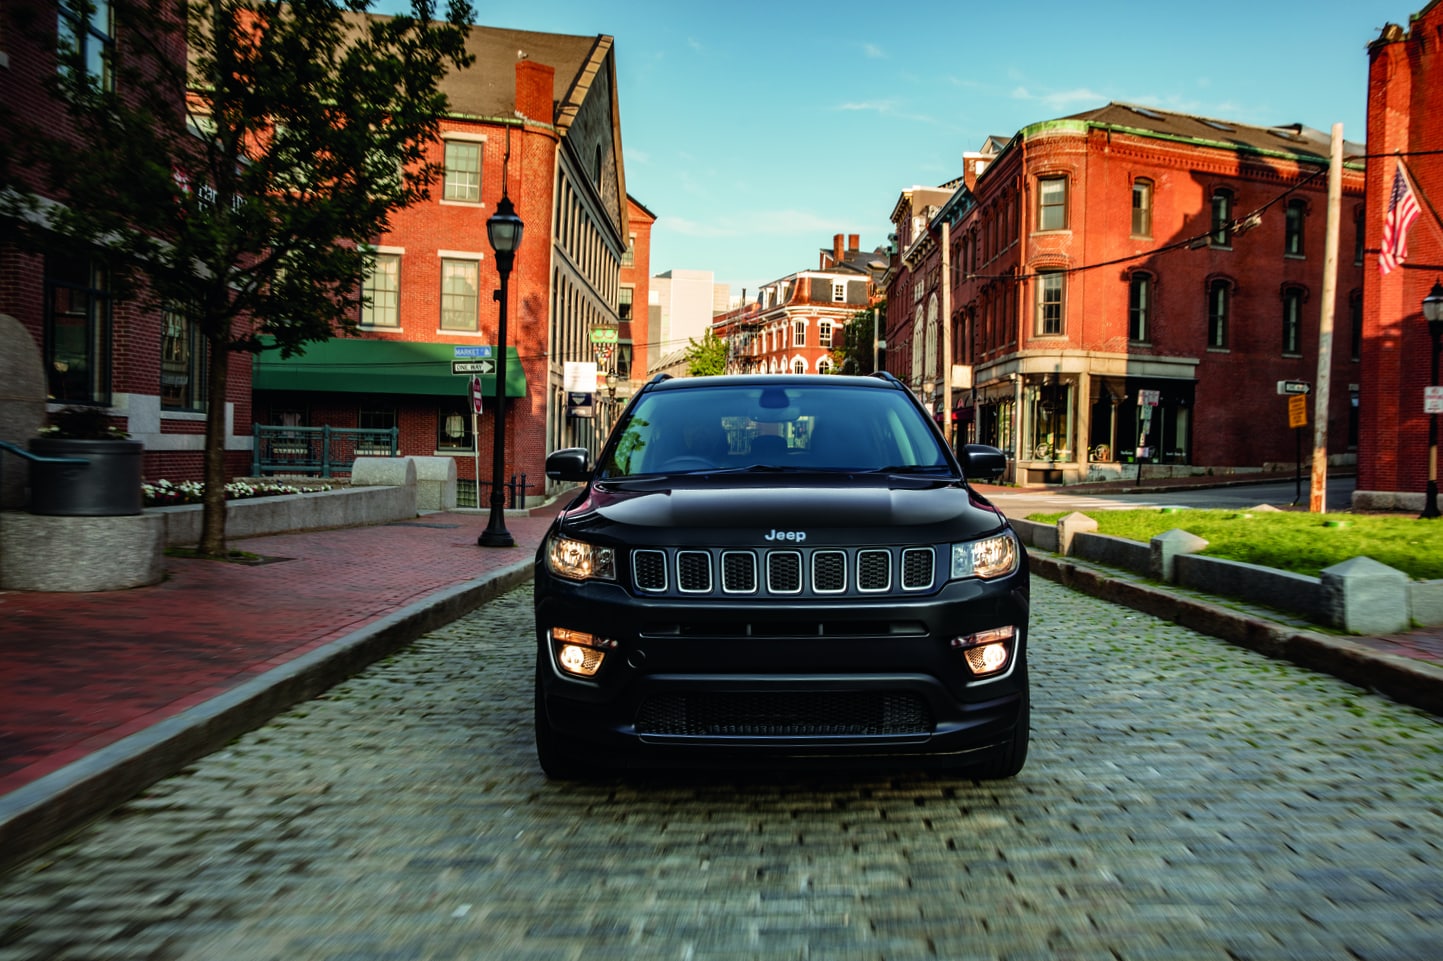 black Jeep Compass SUV driving on a cobblestone street with large front grill facing